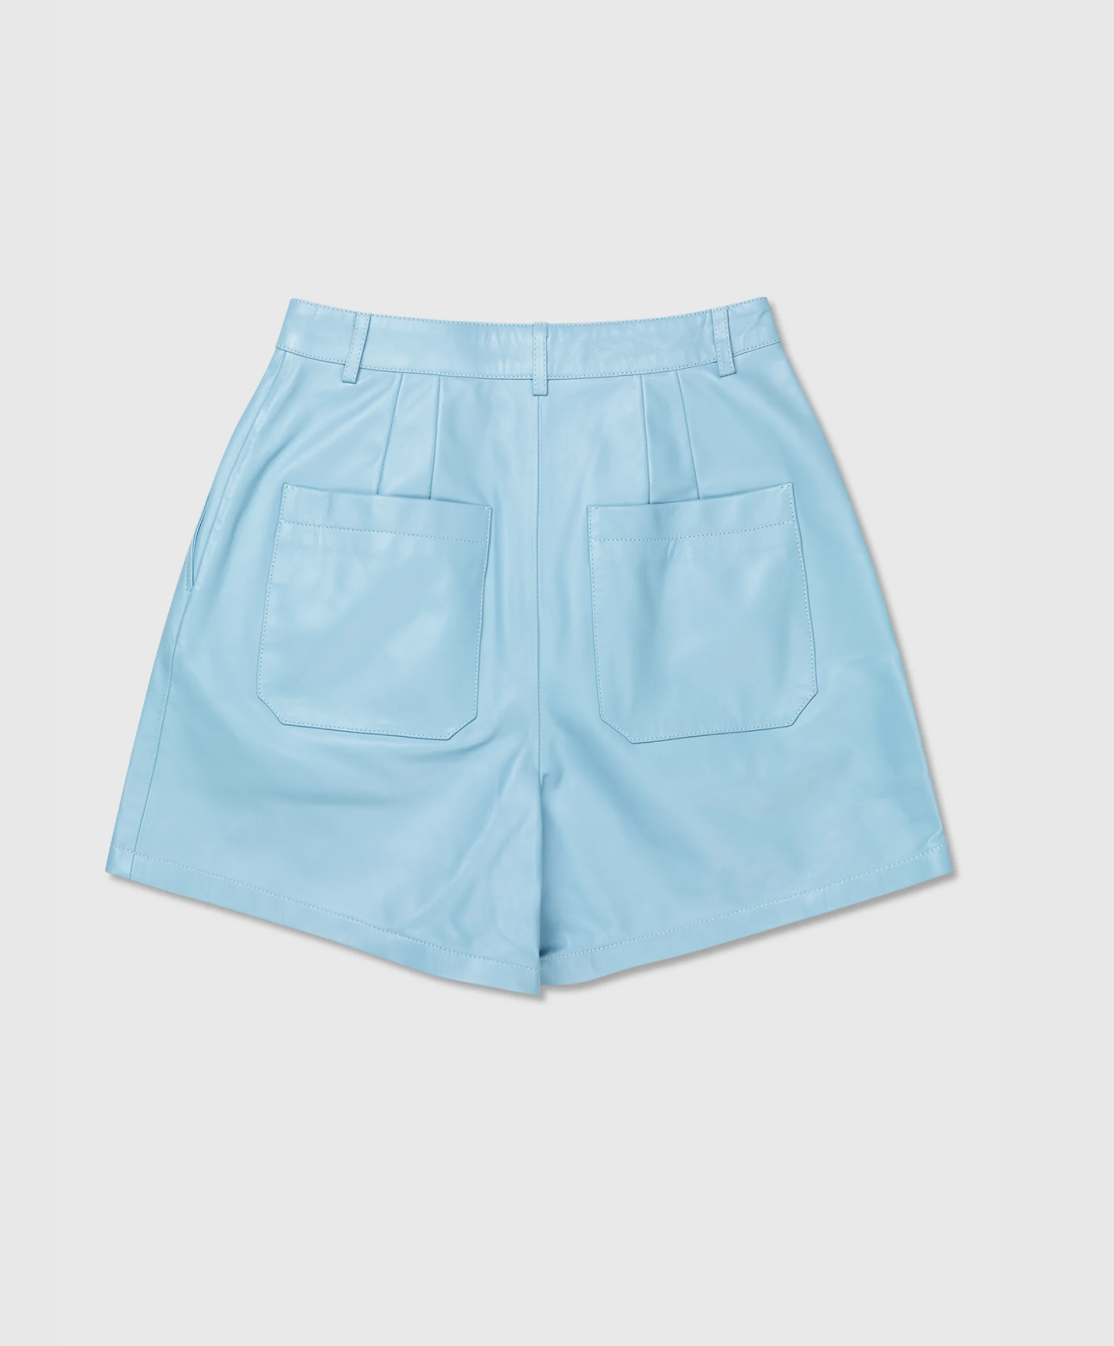 Zoe leather shorts in pale blue by Wood Wood